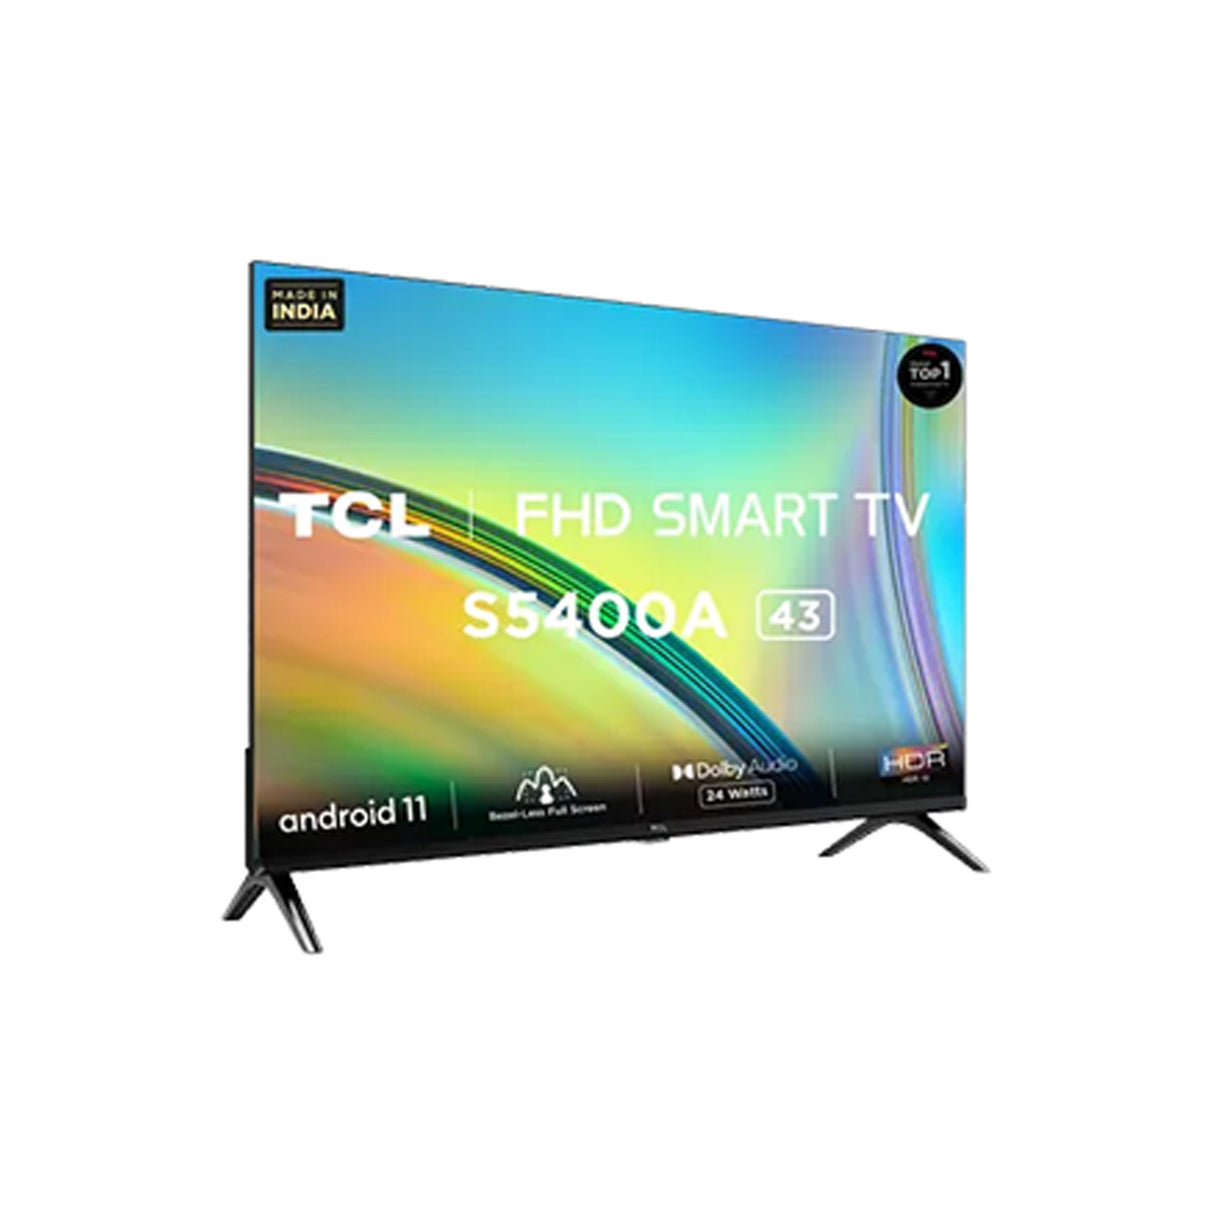 Enjoy Dolby Audio on TCL 43S5400A 43" Smart Android TV with Internet Capabilities